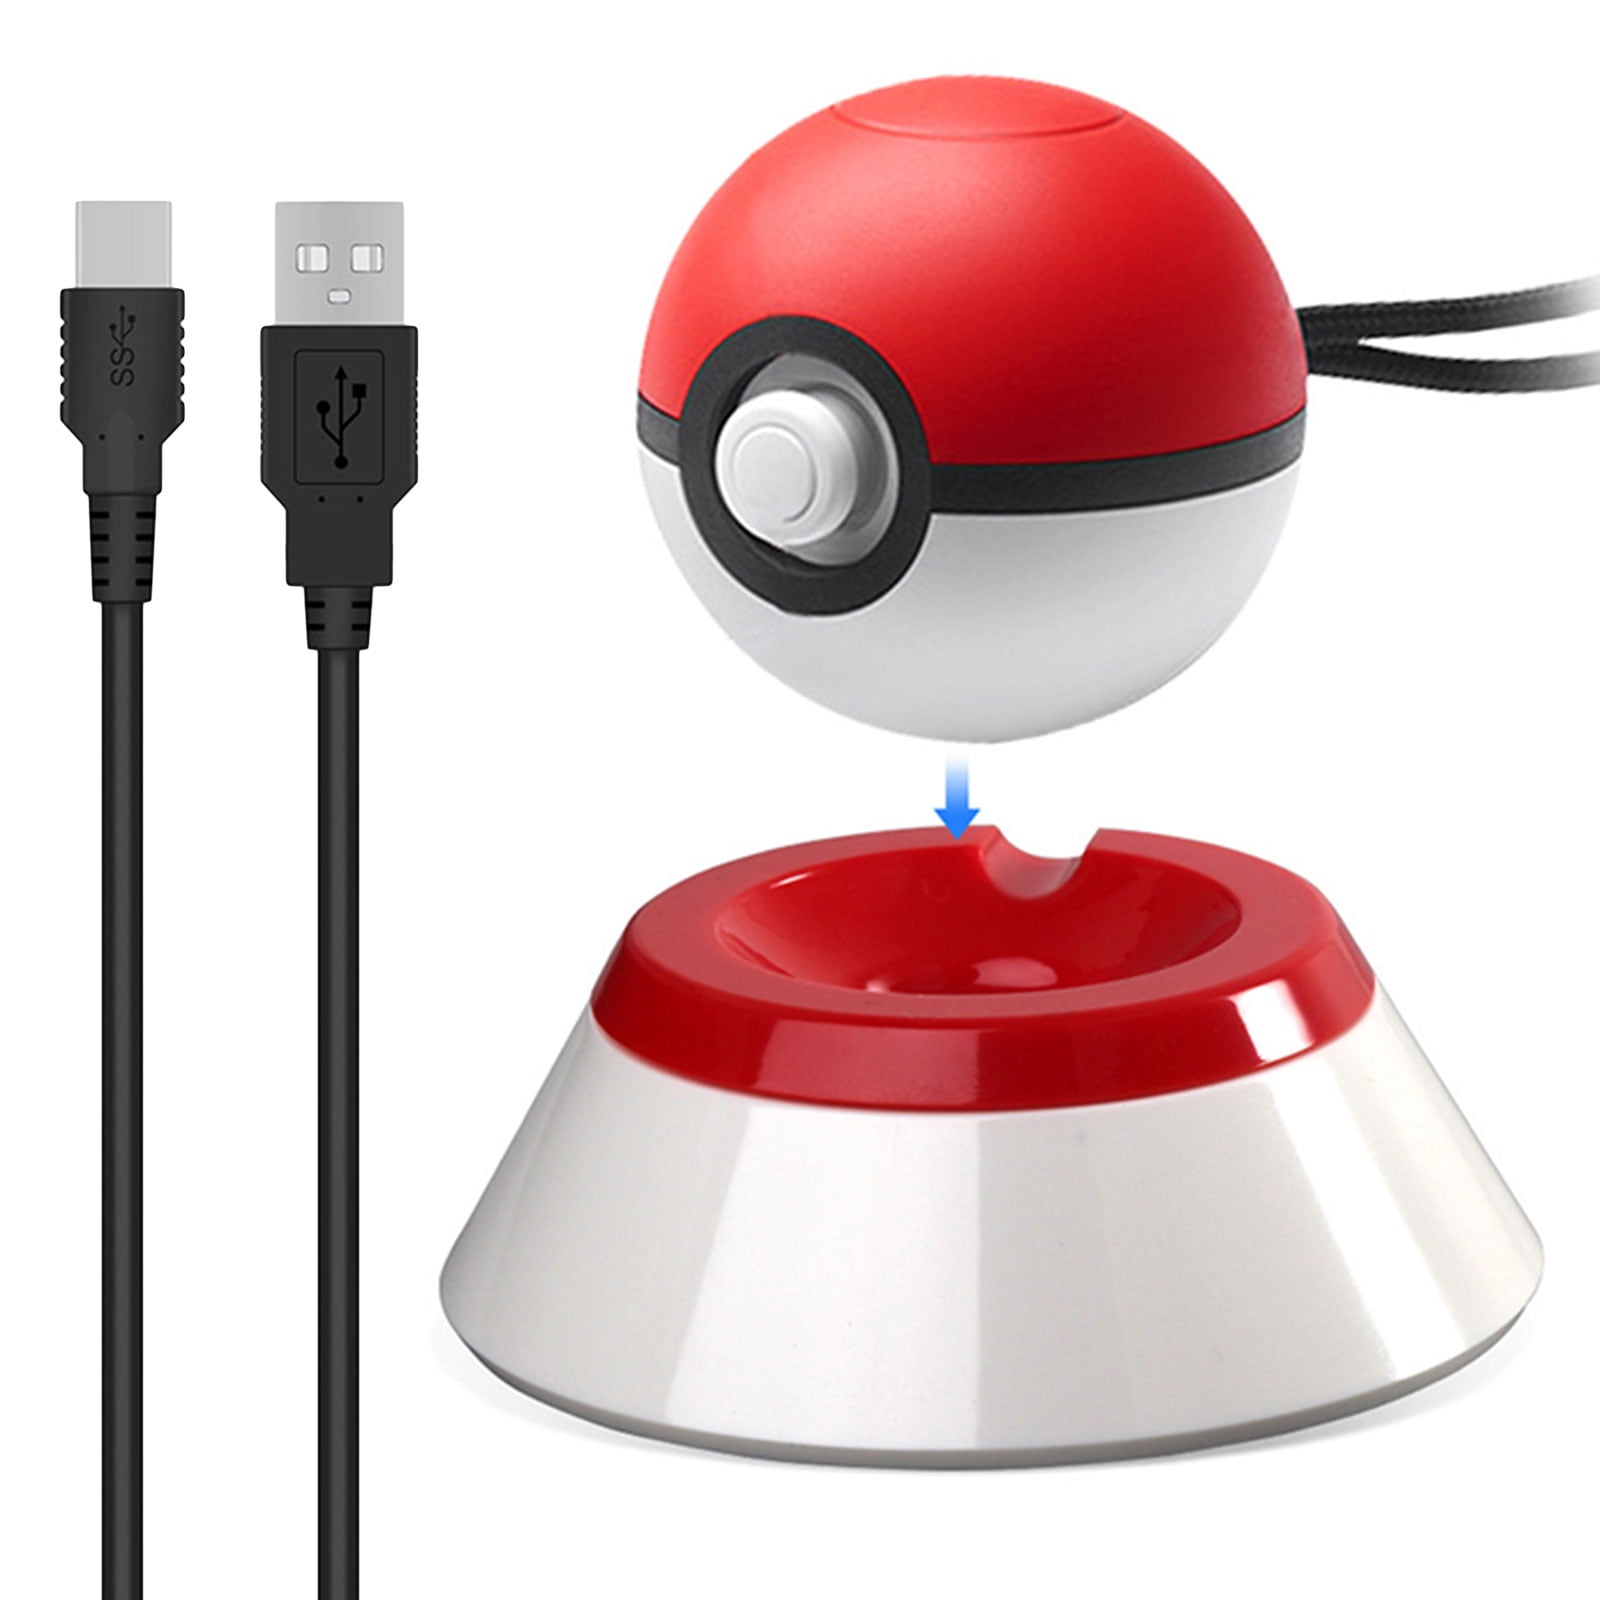 Charging Stand For Nintendo Switch Pokeball Plus 2 In 1 Type C Cable Charge Stand Charging Cord And Bracket Mount For Pokémon Lets Go Pikachu And